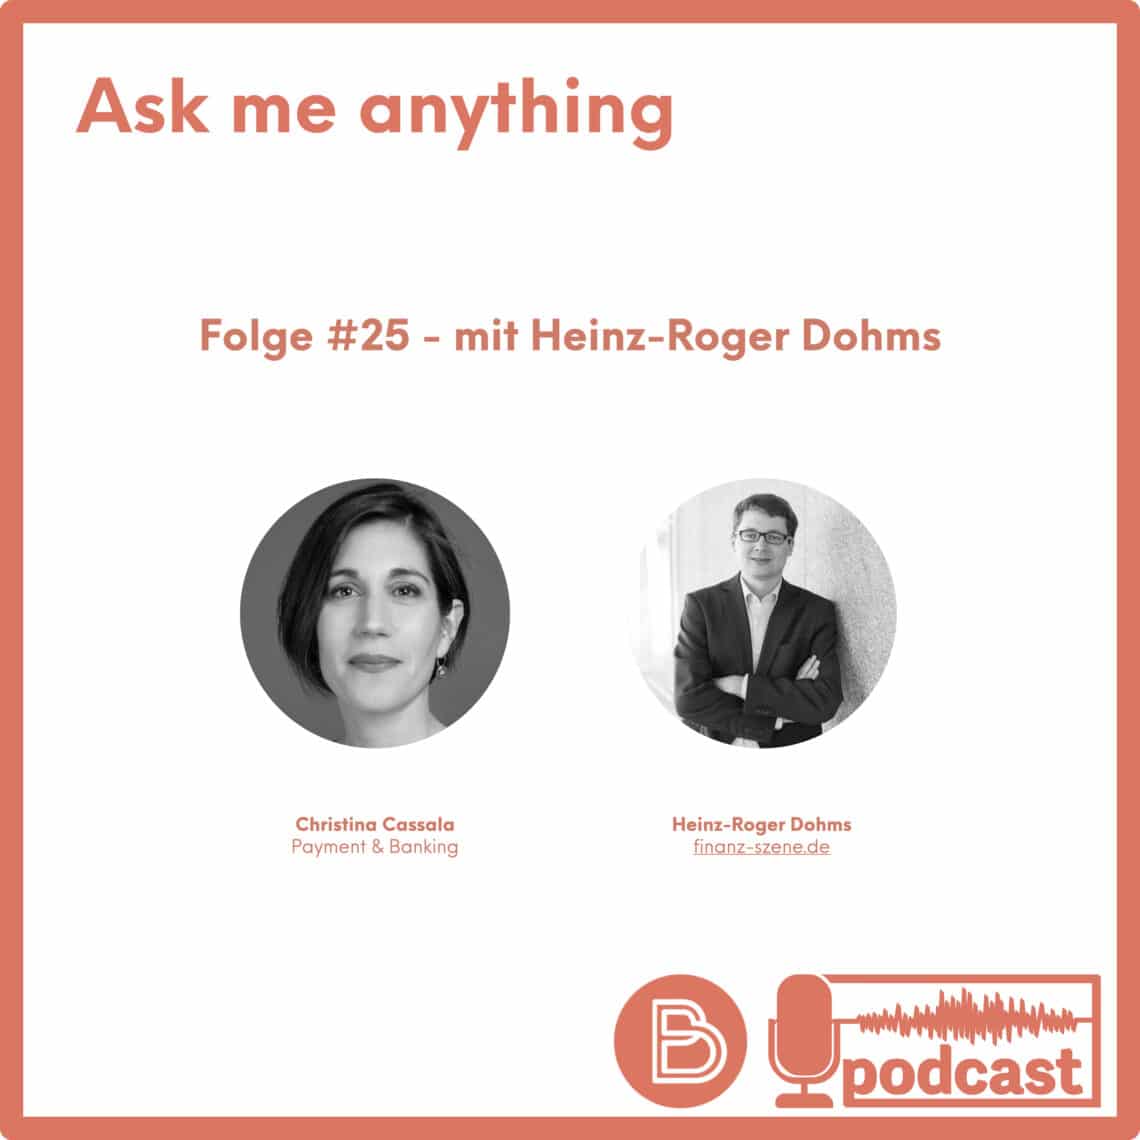 Ask me anything #25 – mit Heinz-Roger Dohms